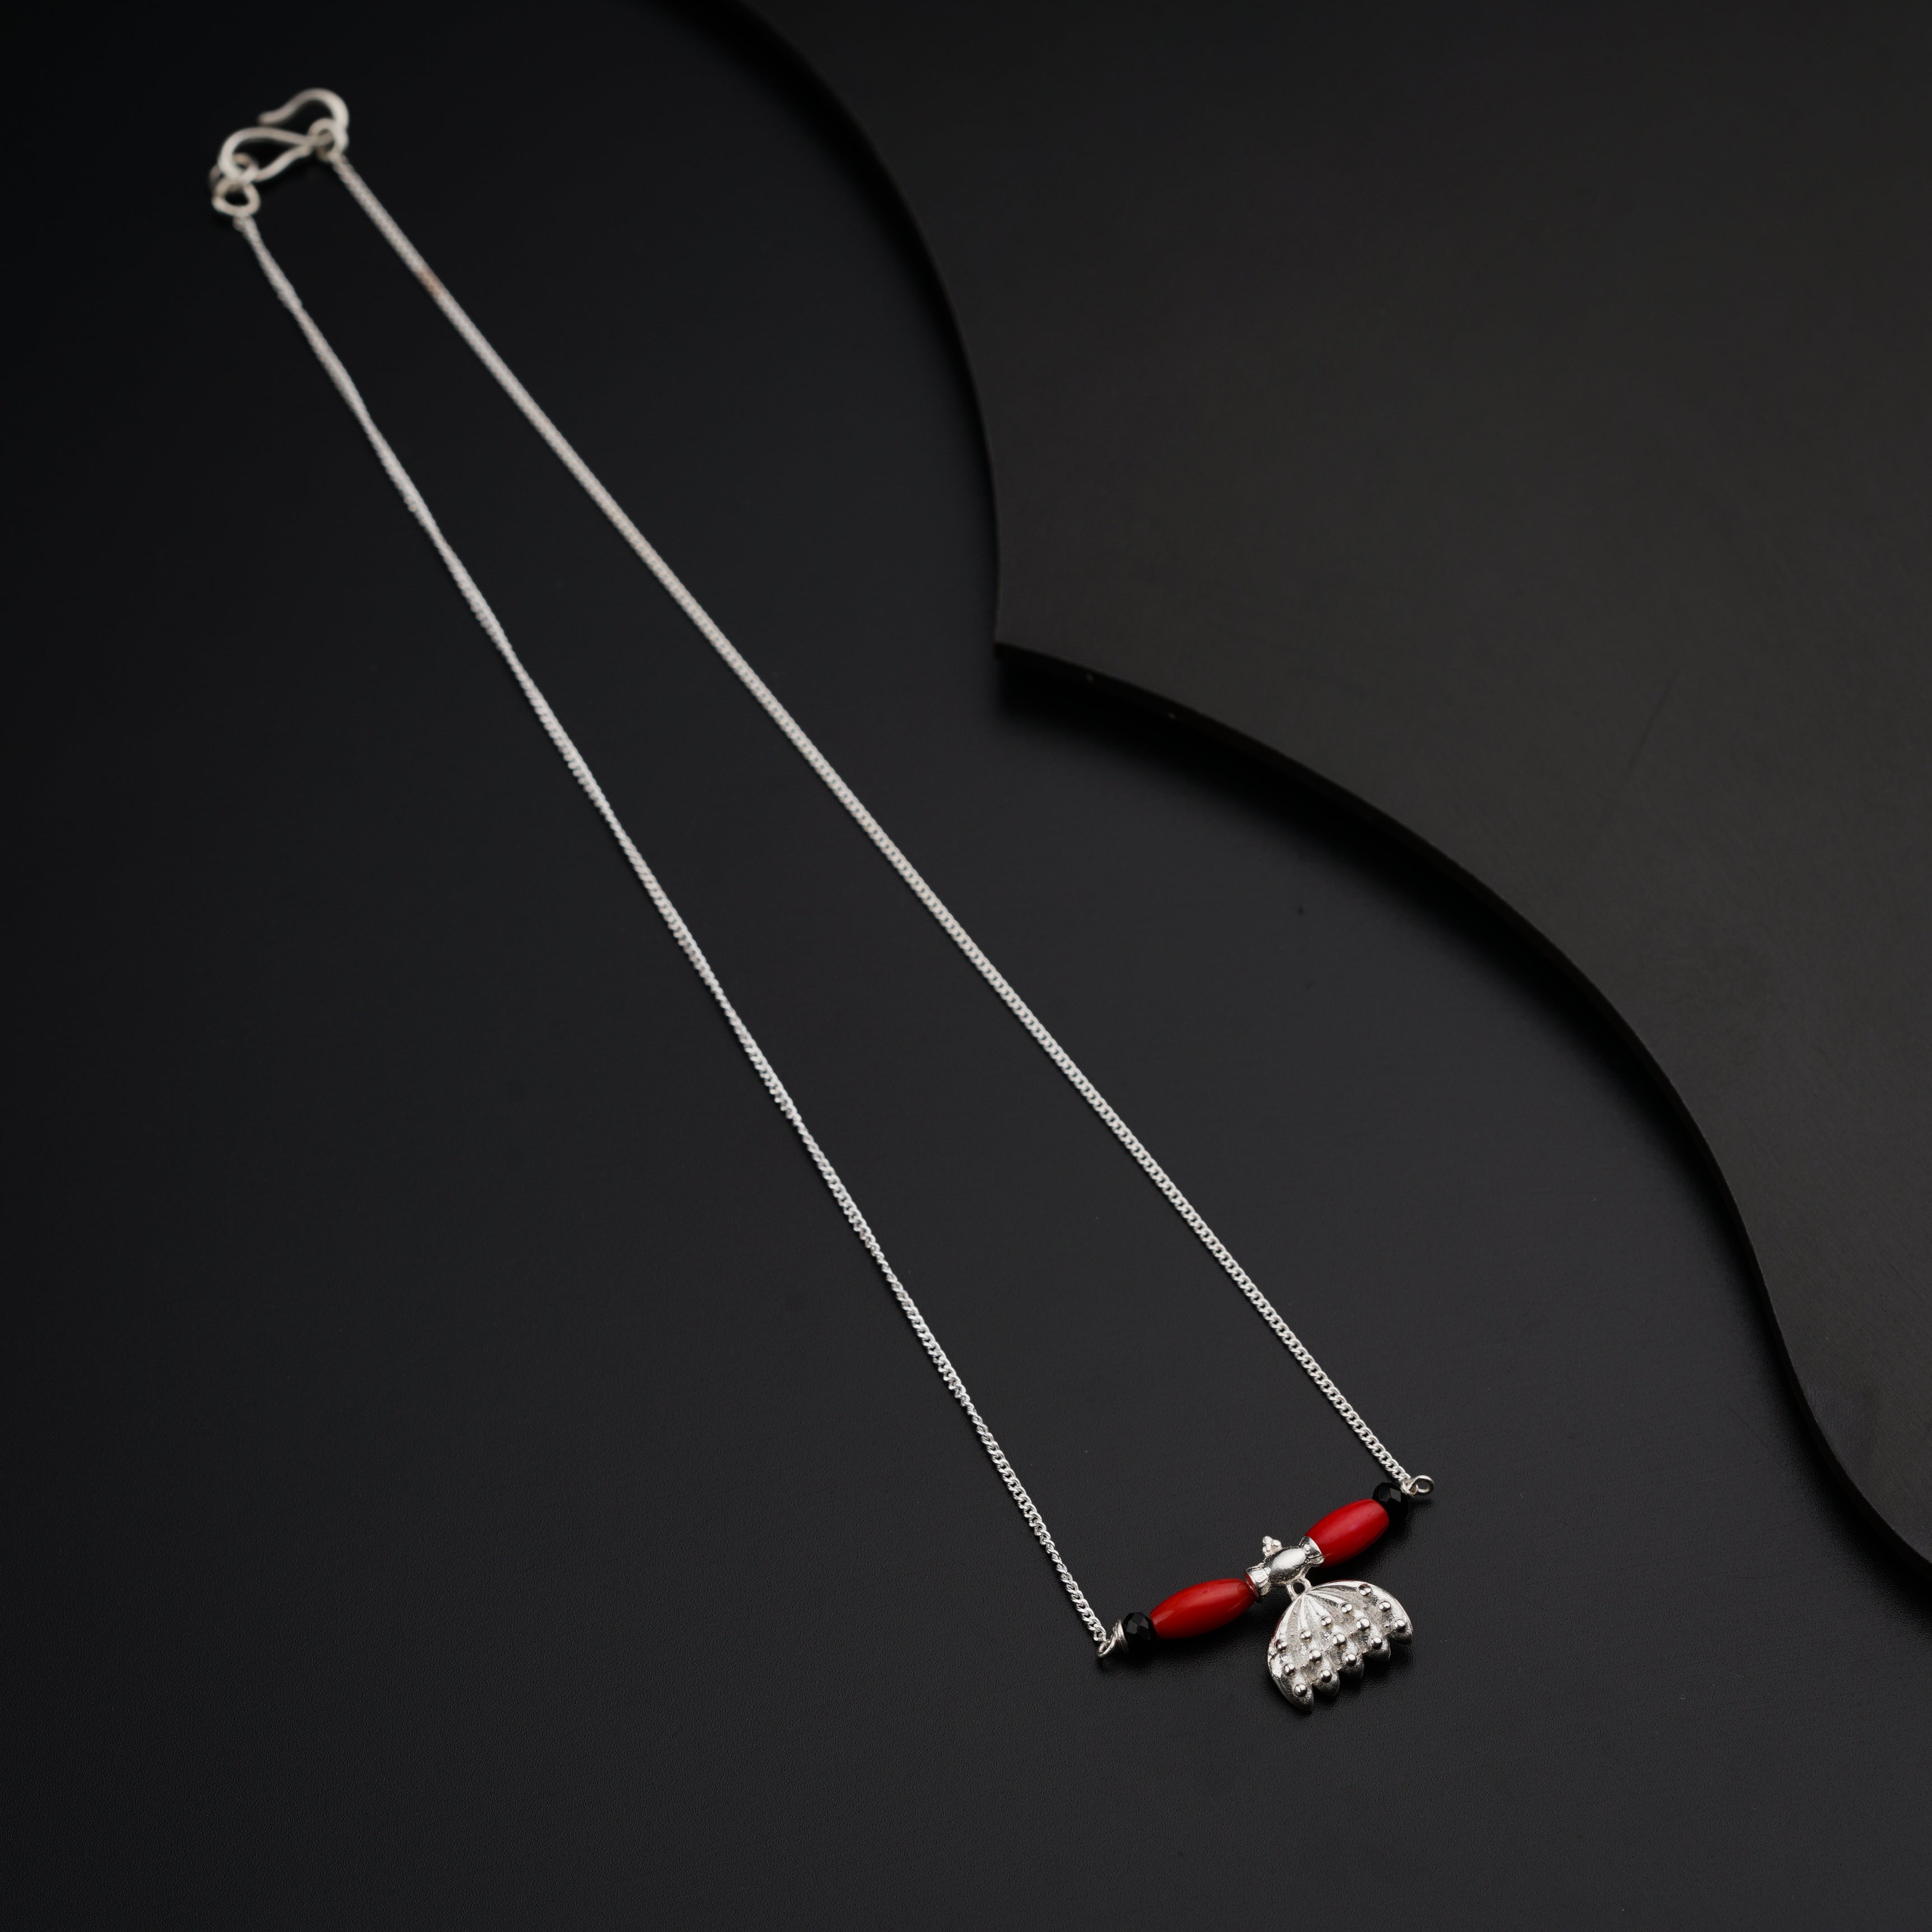 a pair of red and silver necklaces on a black surface